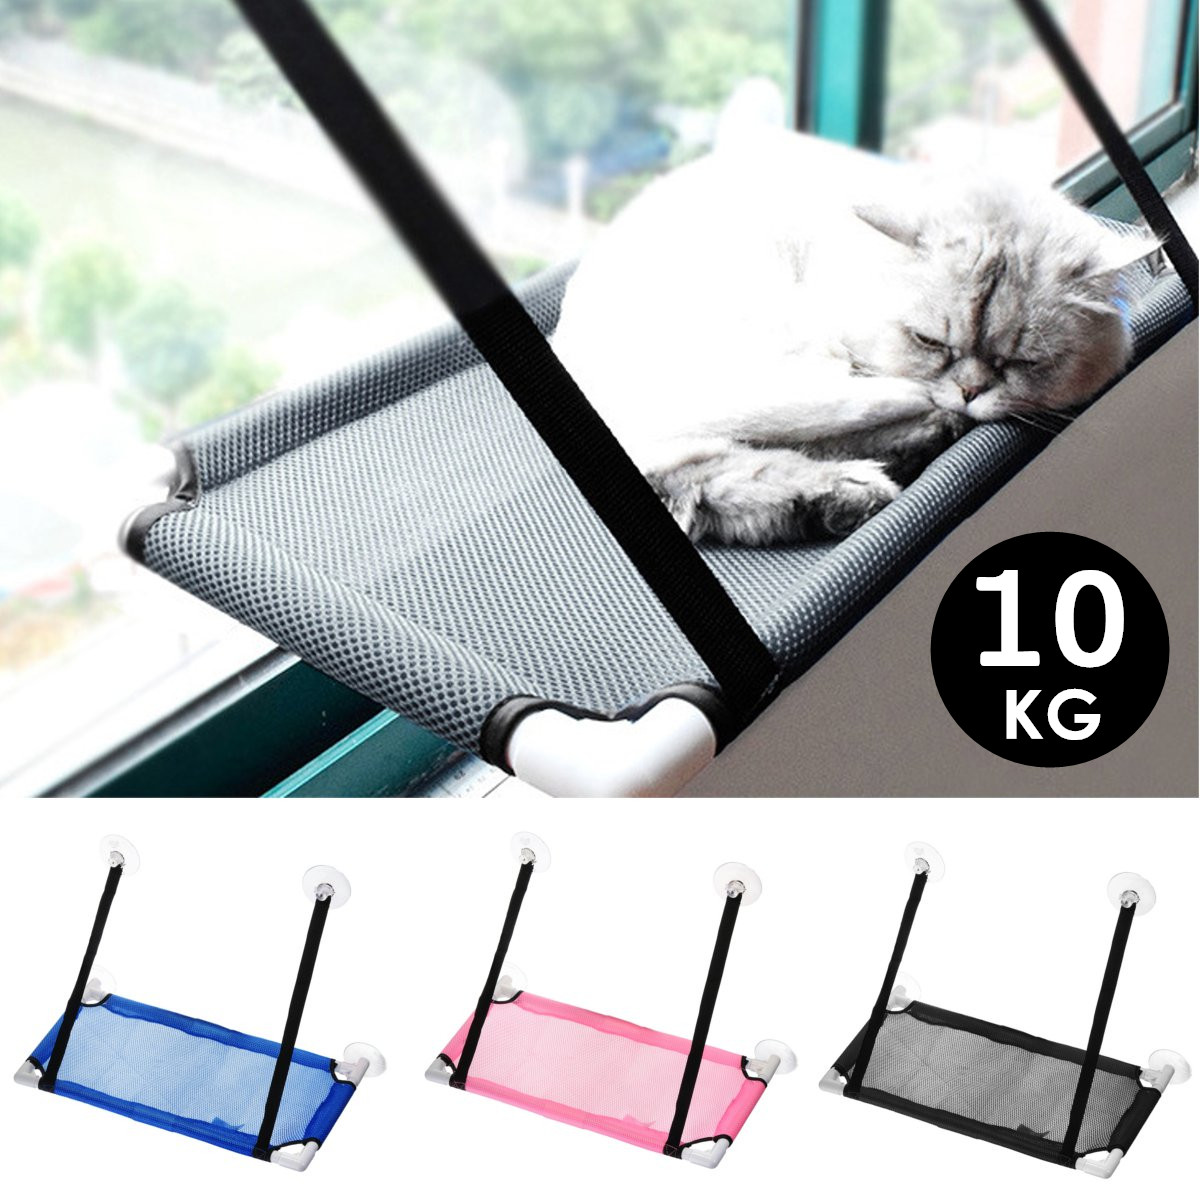 10Kg-Pet-Hammock-Cat-Basking-Window-Mounted-Seat-Home-Suction-Cup-Hanging-Bed-1432292